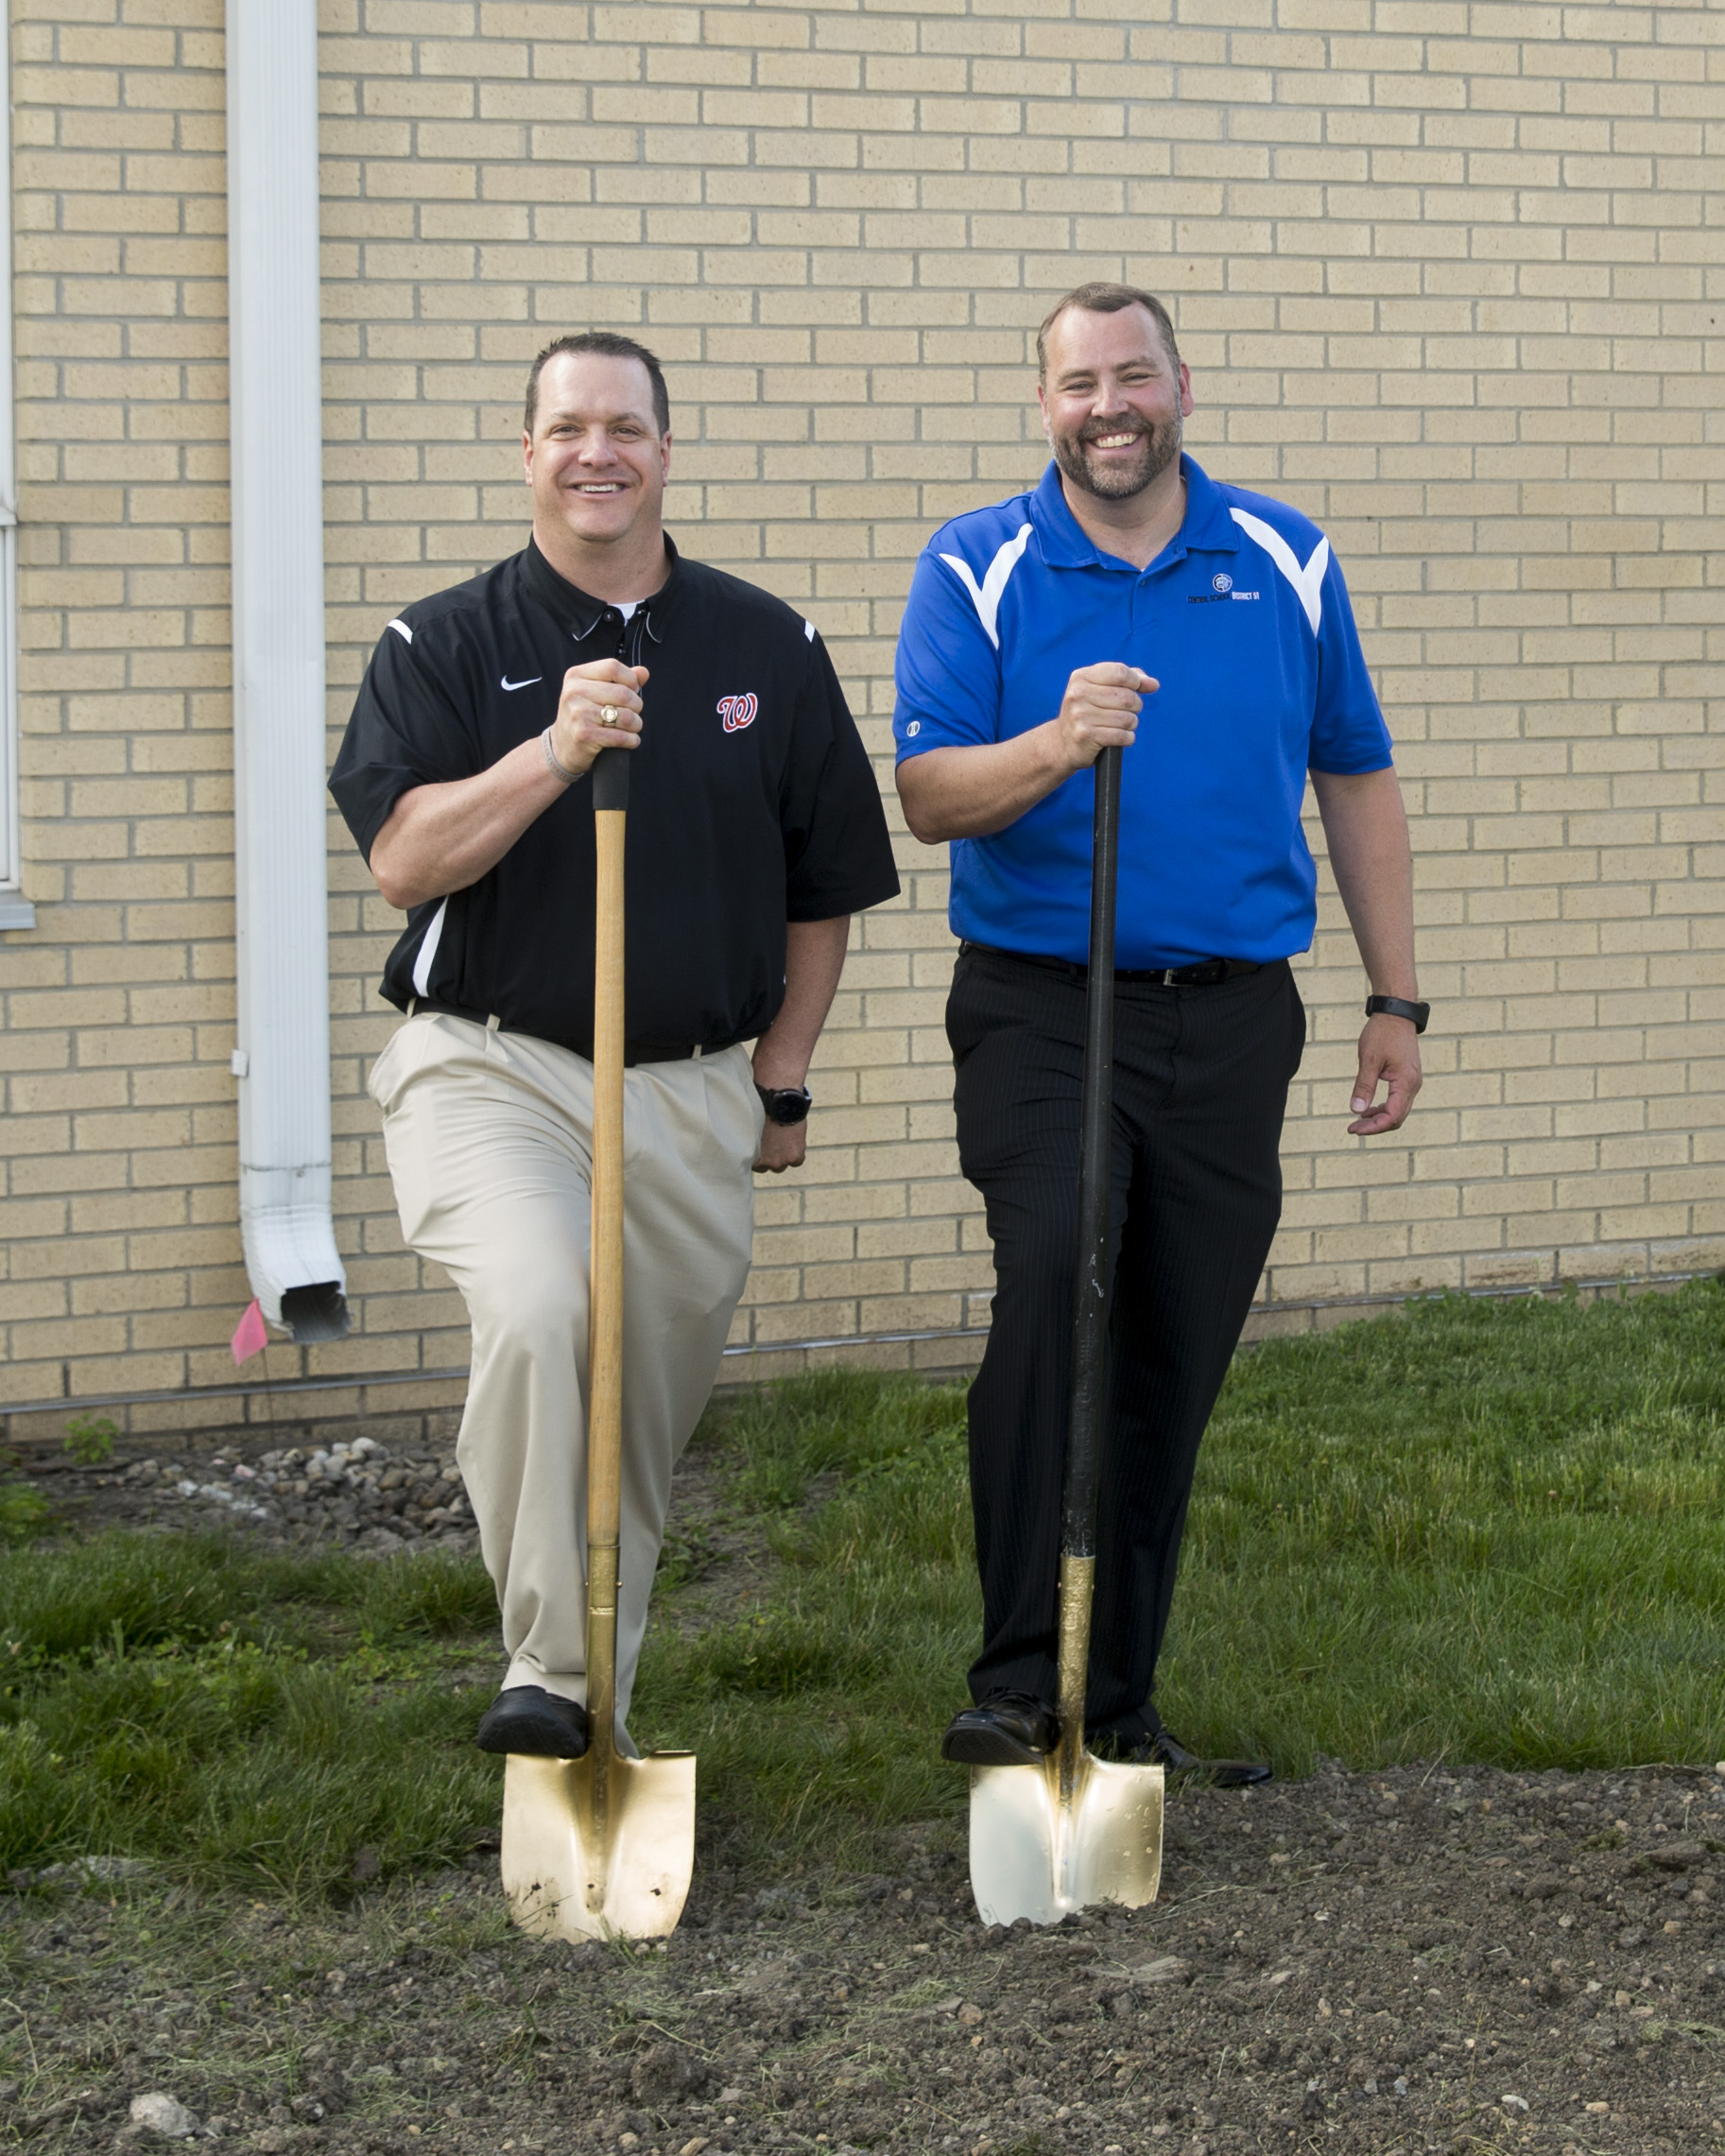 The superintendent and the principal smiling up at the camera and holding up a shovel each.